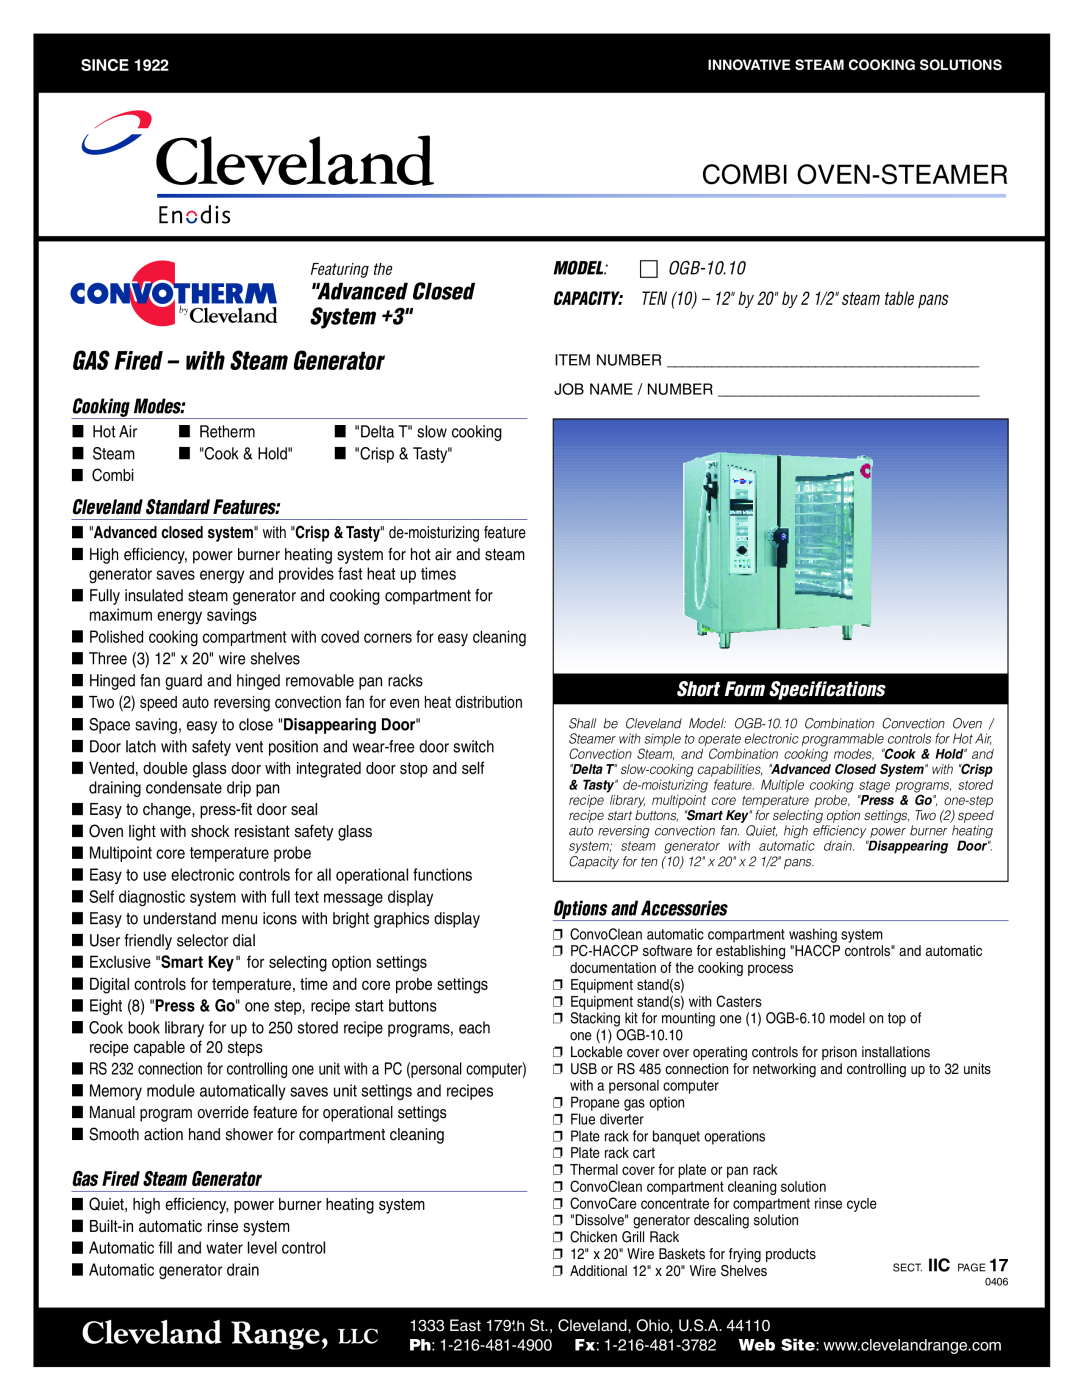 Cleveland Range OGS-10.10 Cleveland Range, LLC, Combi Oven-Steamer, GAS Fired - with Steam Generator, Advanced Closed 